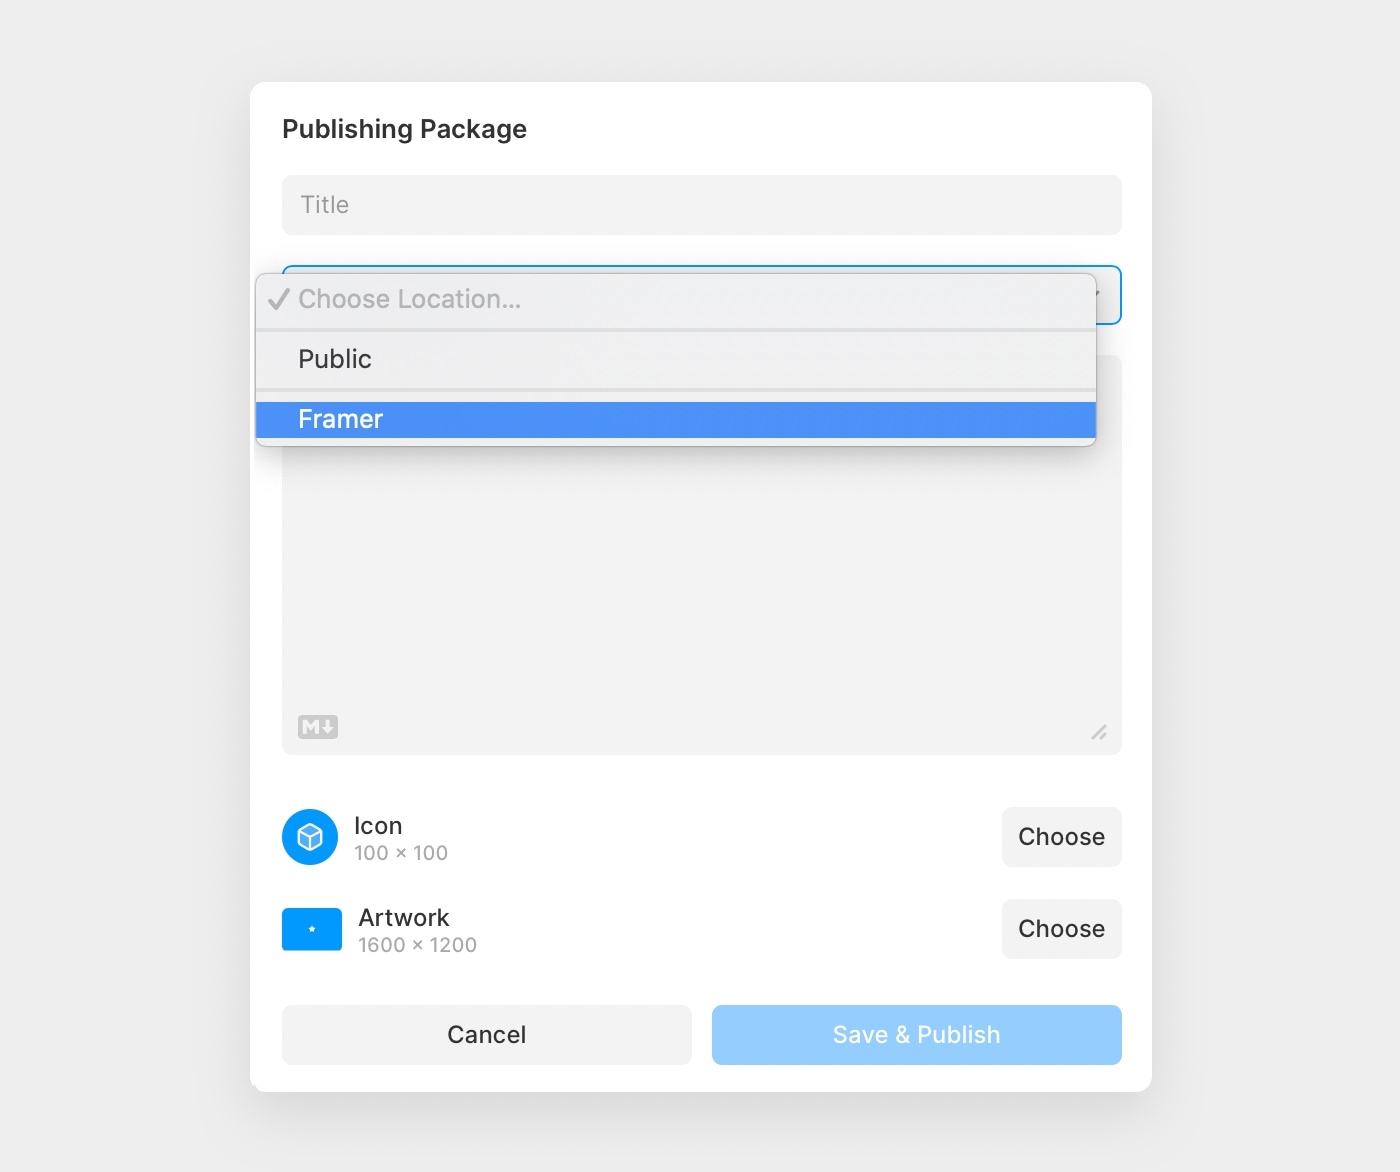 A publish modal that allows users to publish a Framer package